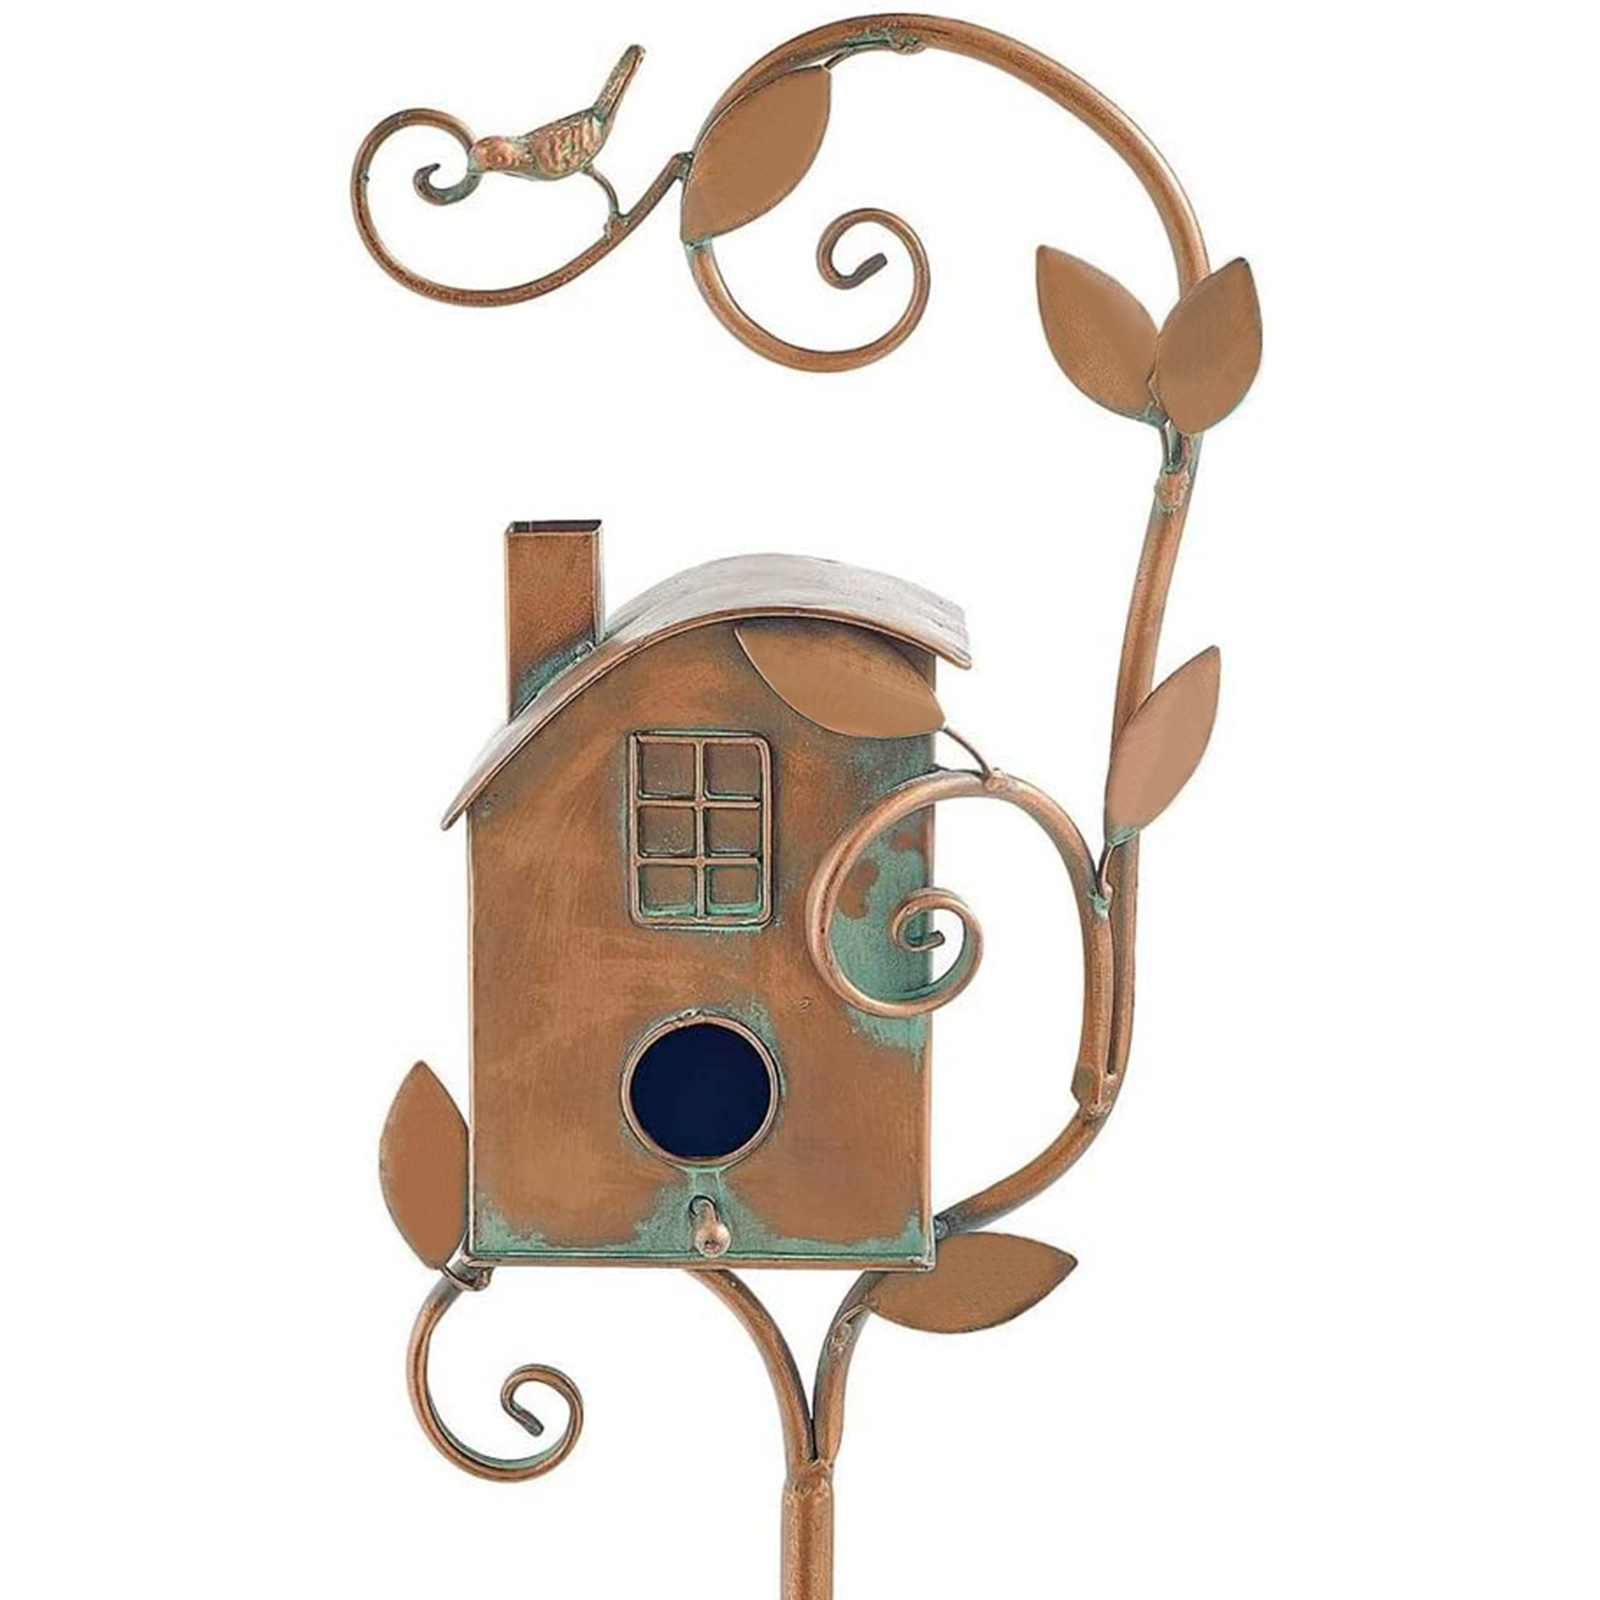 Asdomo Metal Birdhouse Garden Stakes Bird's Nest Multi-size Yellow Easy To Assemble Resting Place For Birds - image 3 of 9